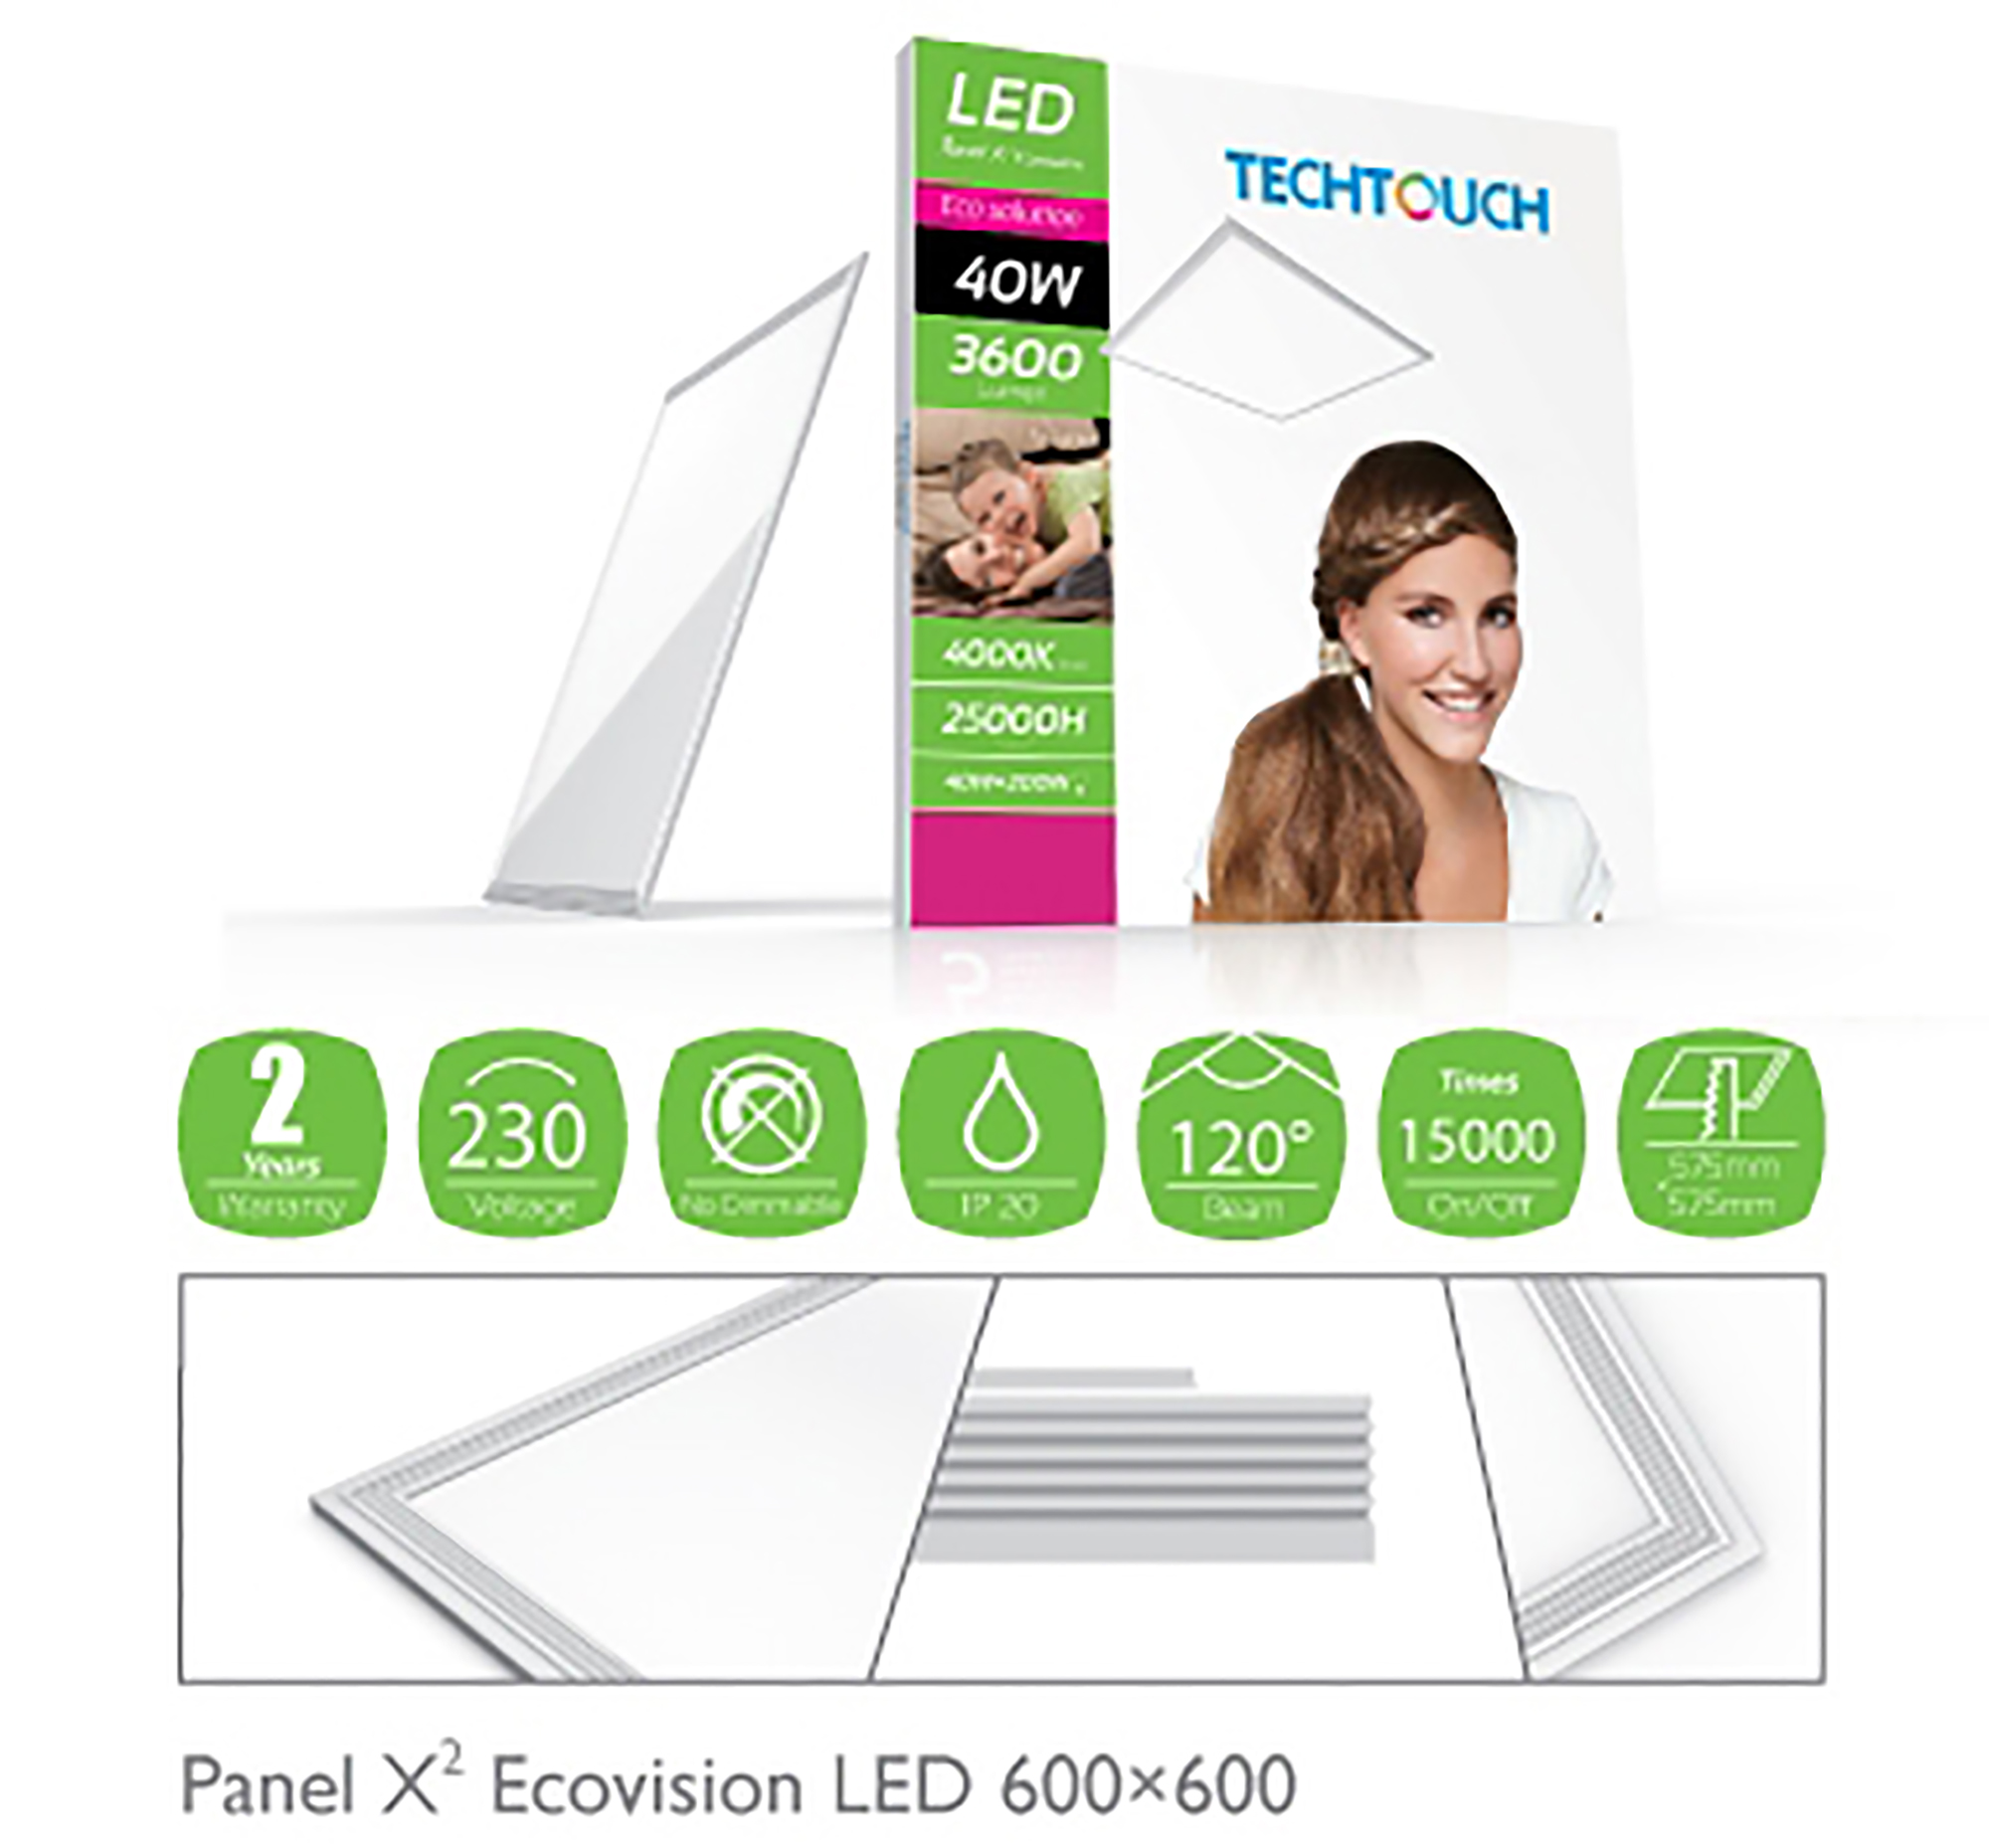 Panel X2 Ecovision Recessed Ceiling Luminaires Techtouch Square/Rectangular Recess Ceiling